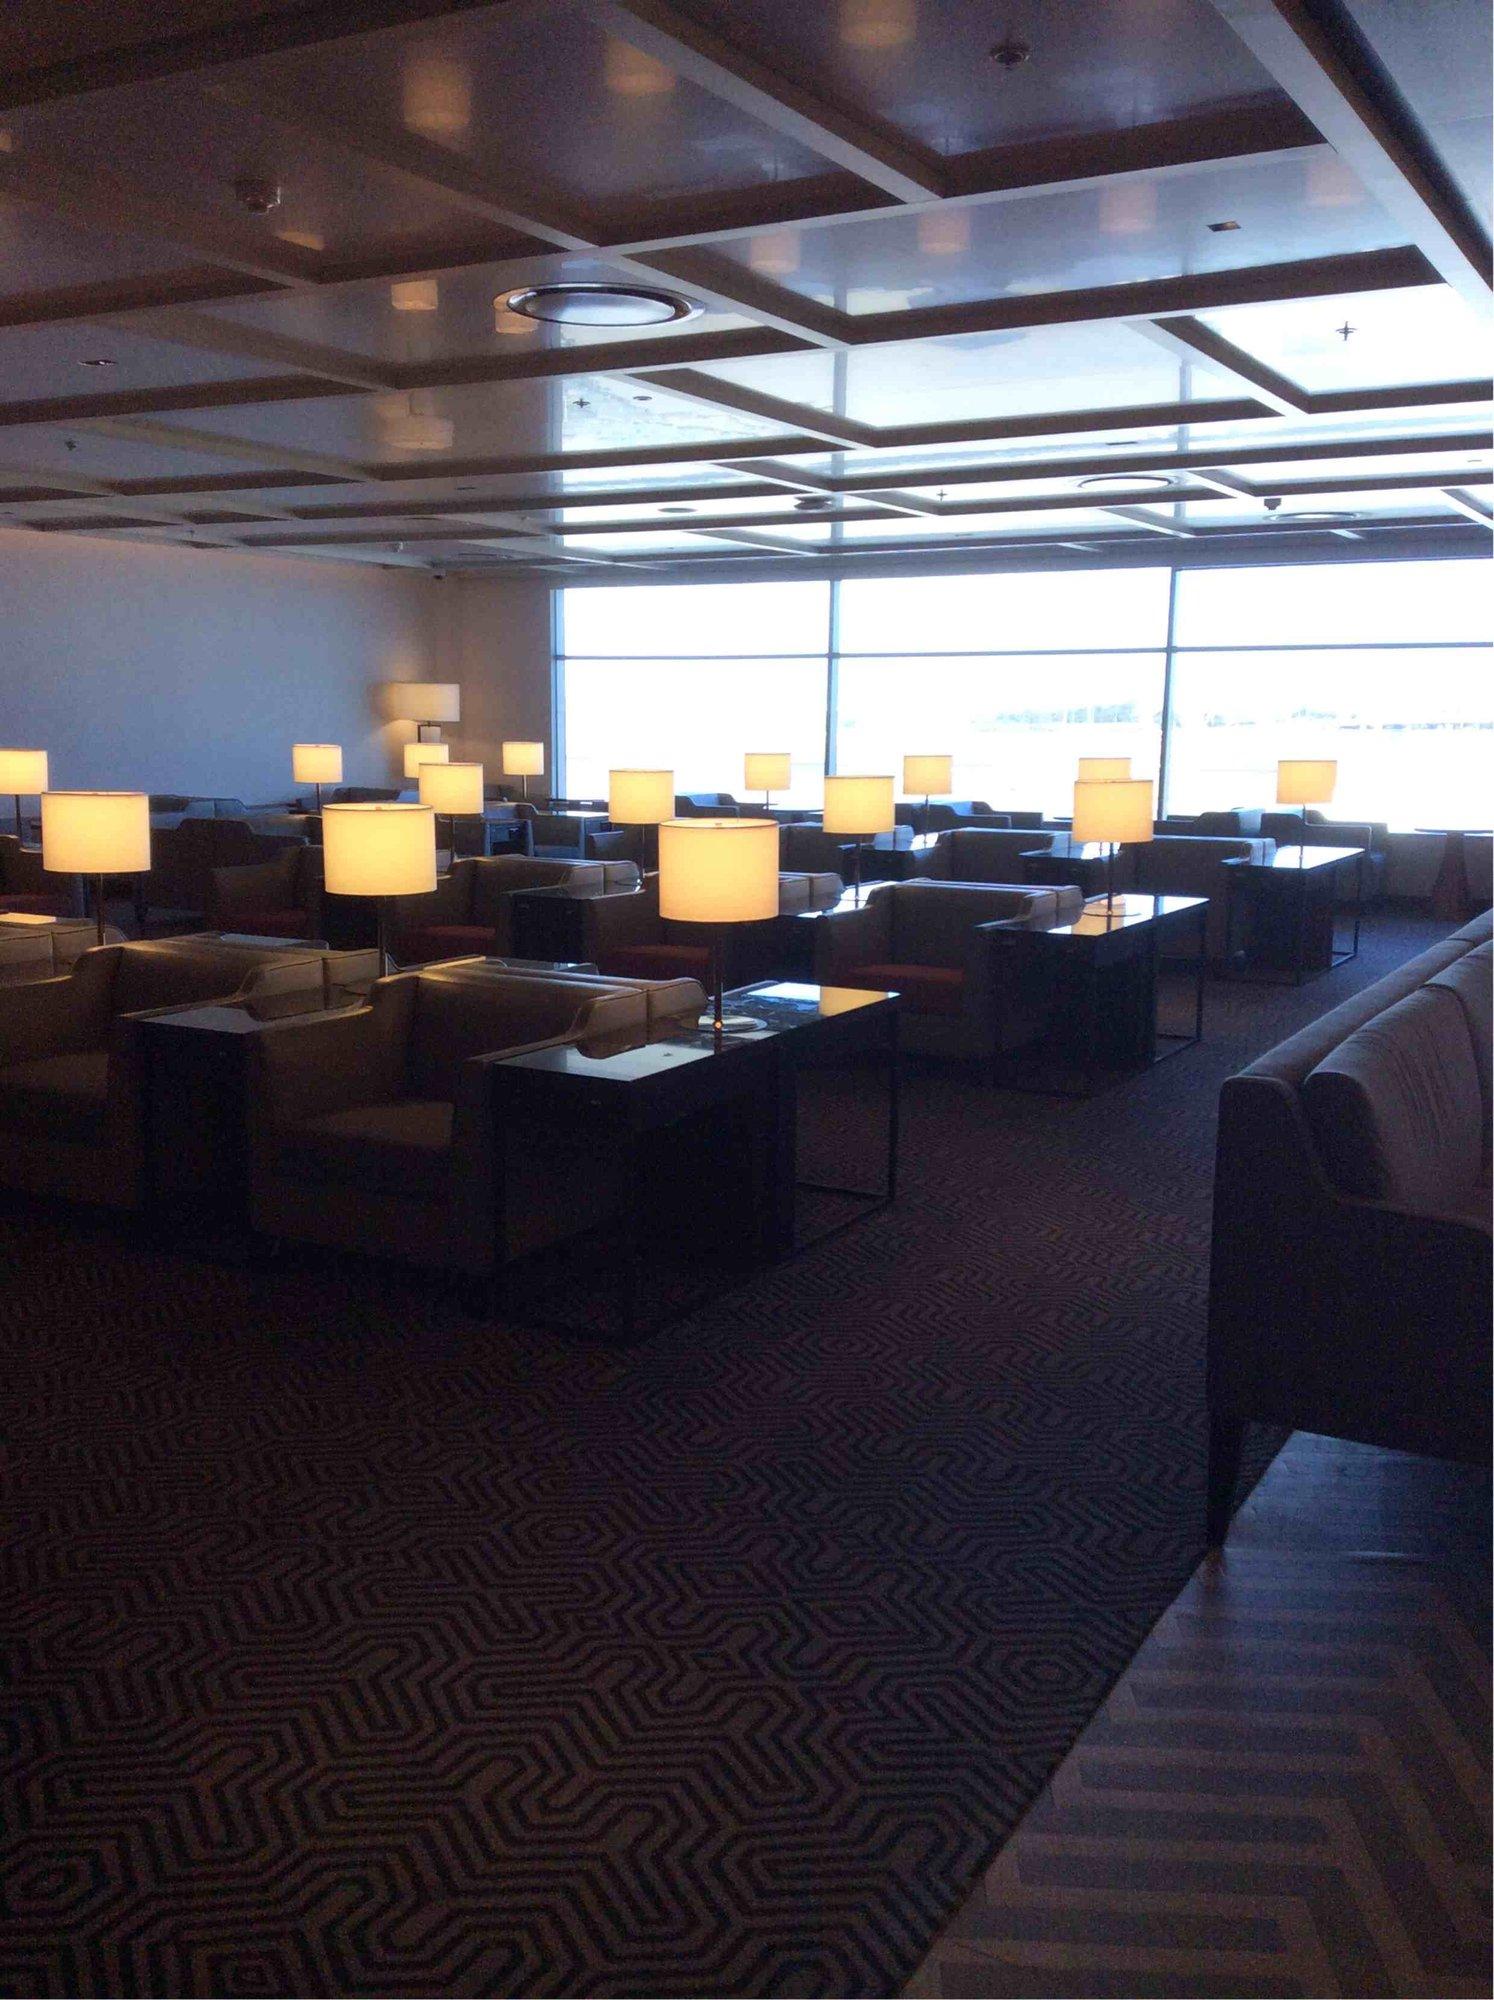 Singapore Airlines SilverKris Business Class Lounge image 3 of 20